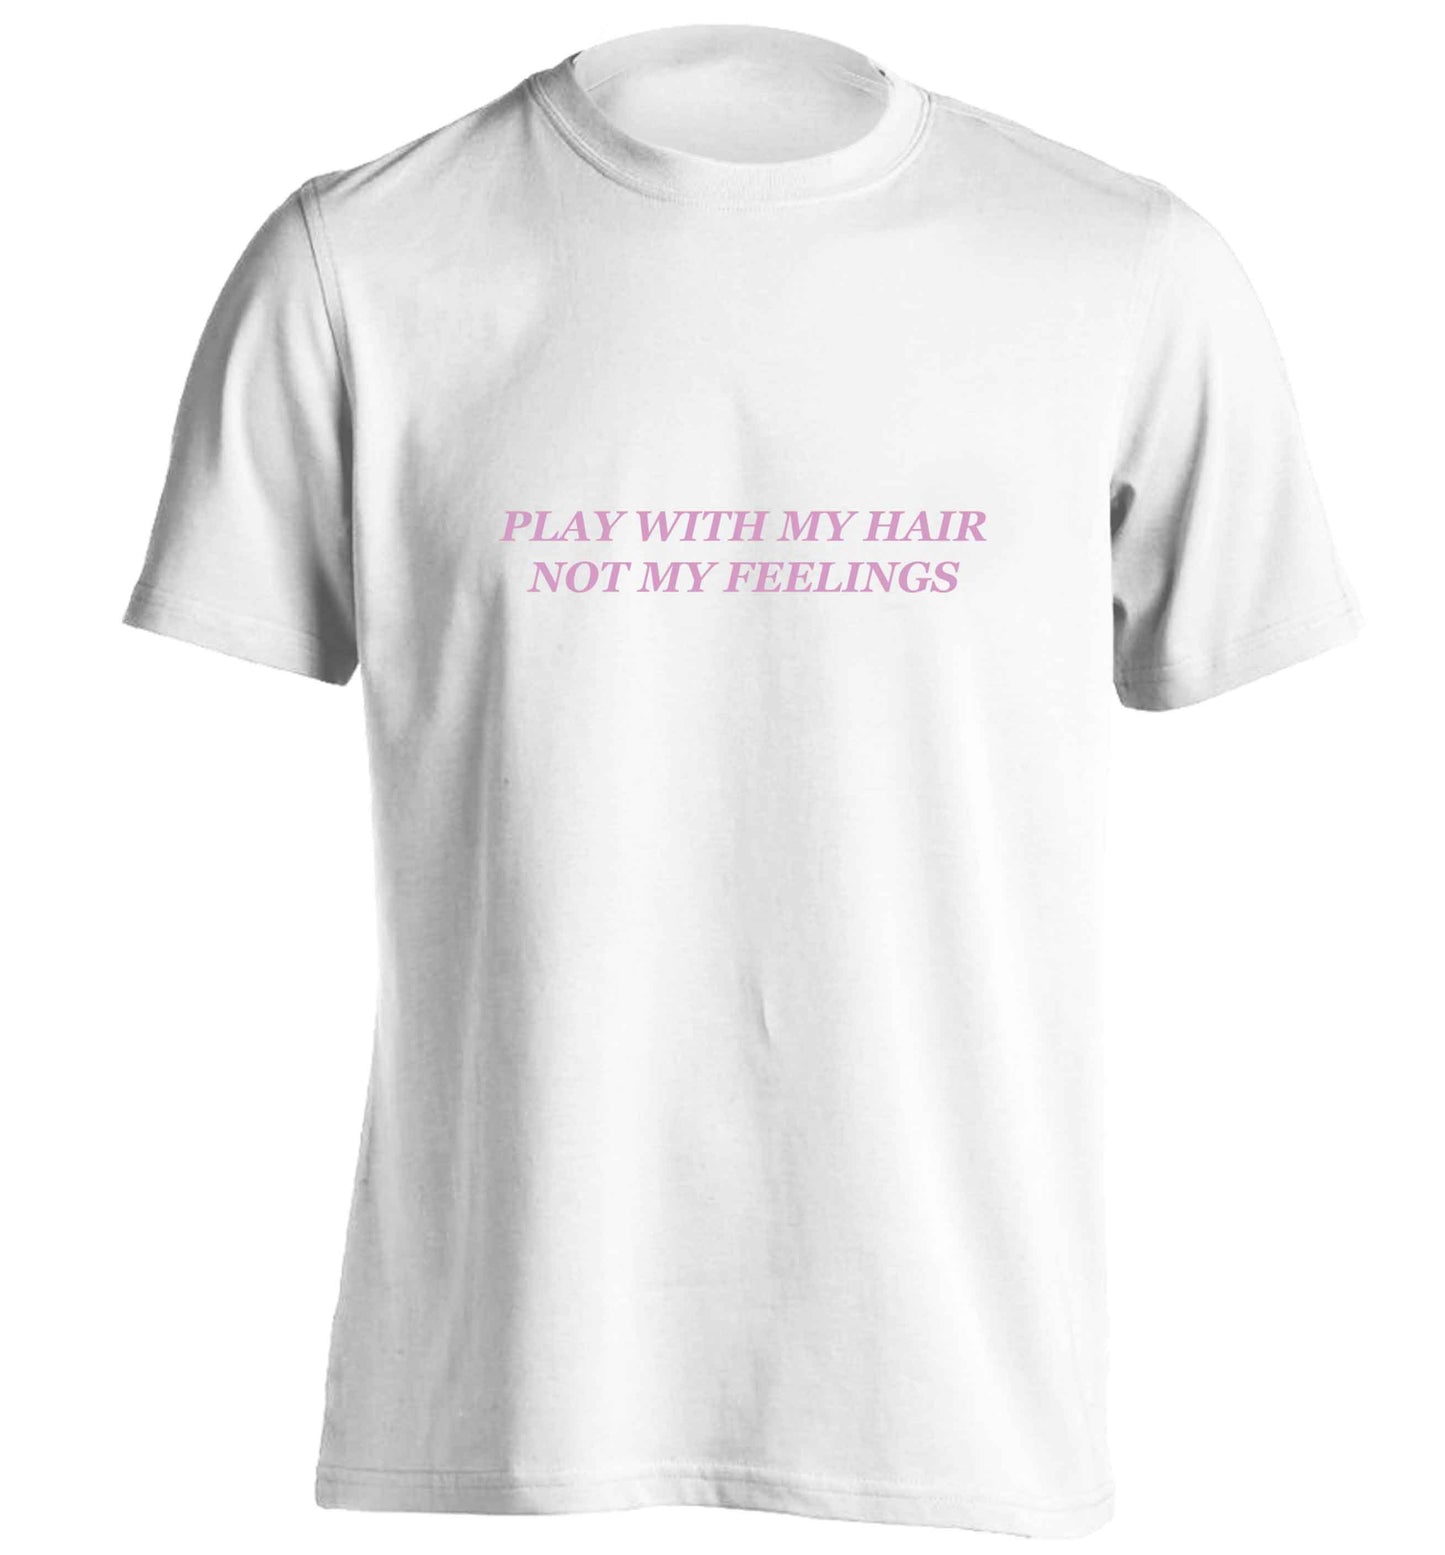 Play with my hair not my feelings adults unisex white Tshirt 2XL